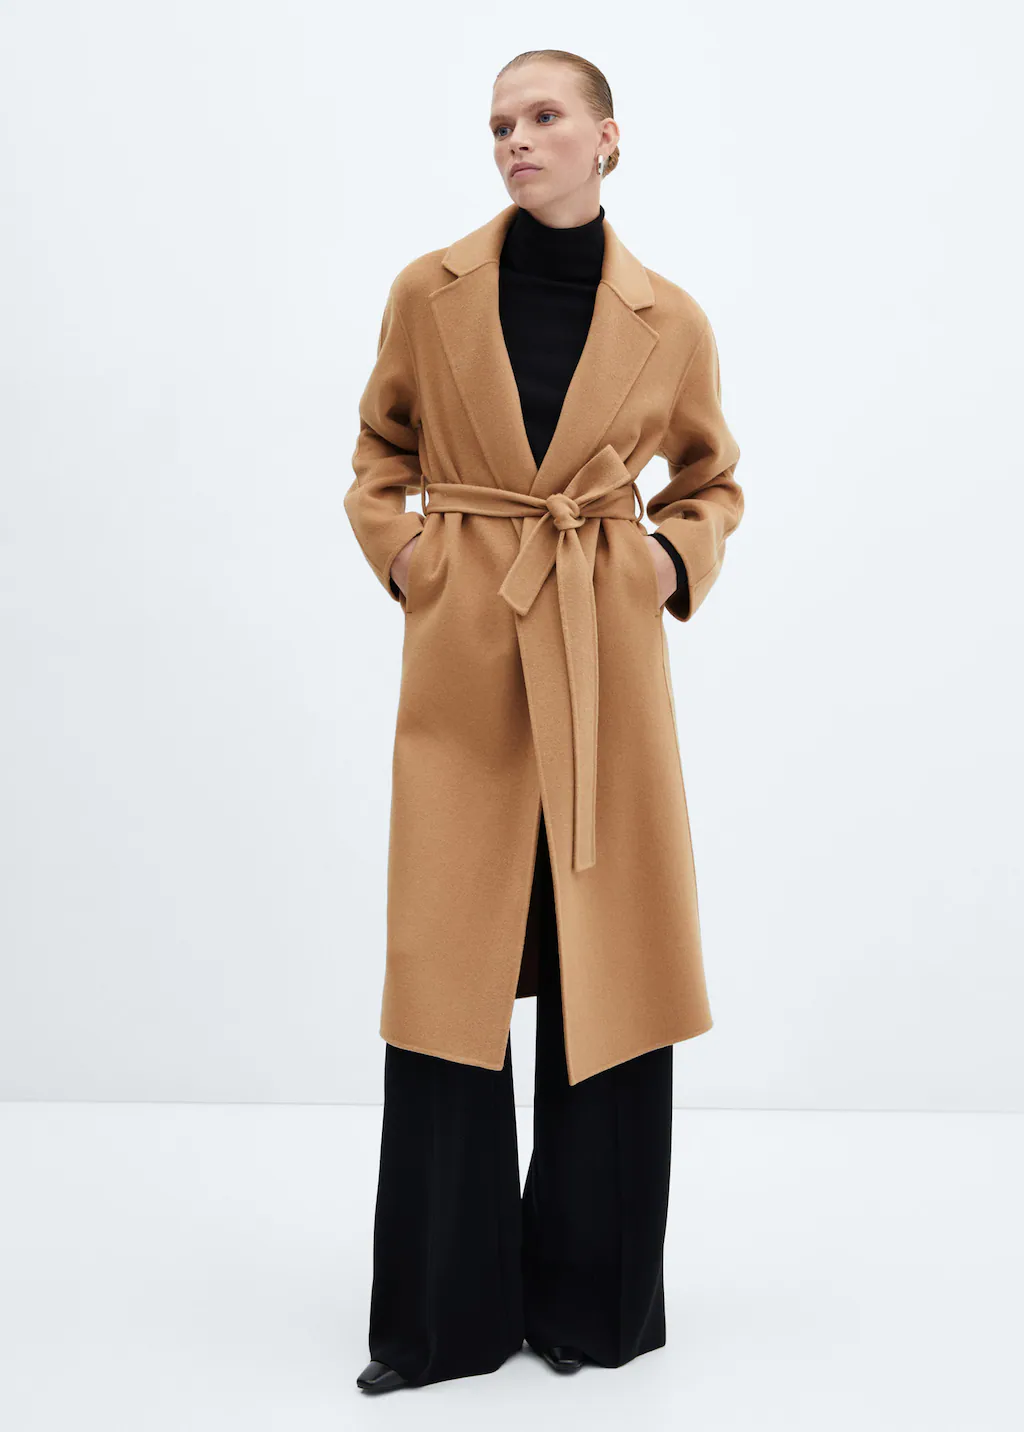 H&M Calf-length coat in woven fabric made from a wool blend that has notch lapels with a decorative buttonhole. Buttons at the front and a wide, detachable belt at the waist. Fake welt pocket on the chest, jetted front pockets with a flap and a single back vent. Lined.

